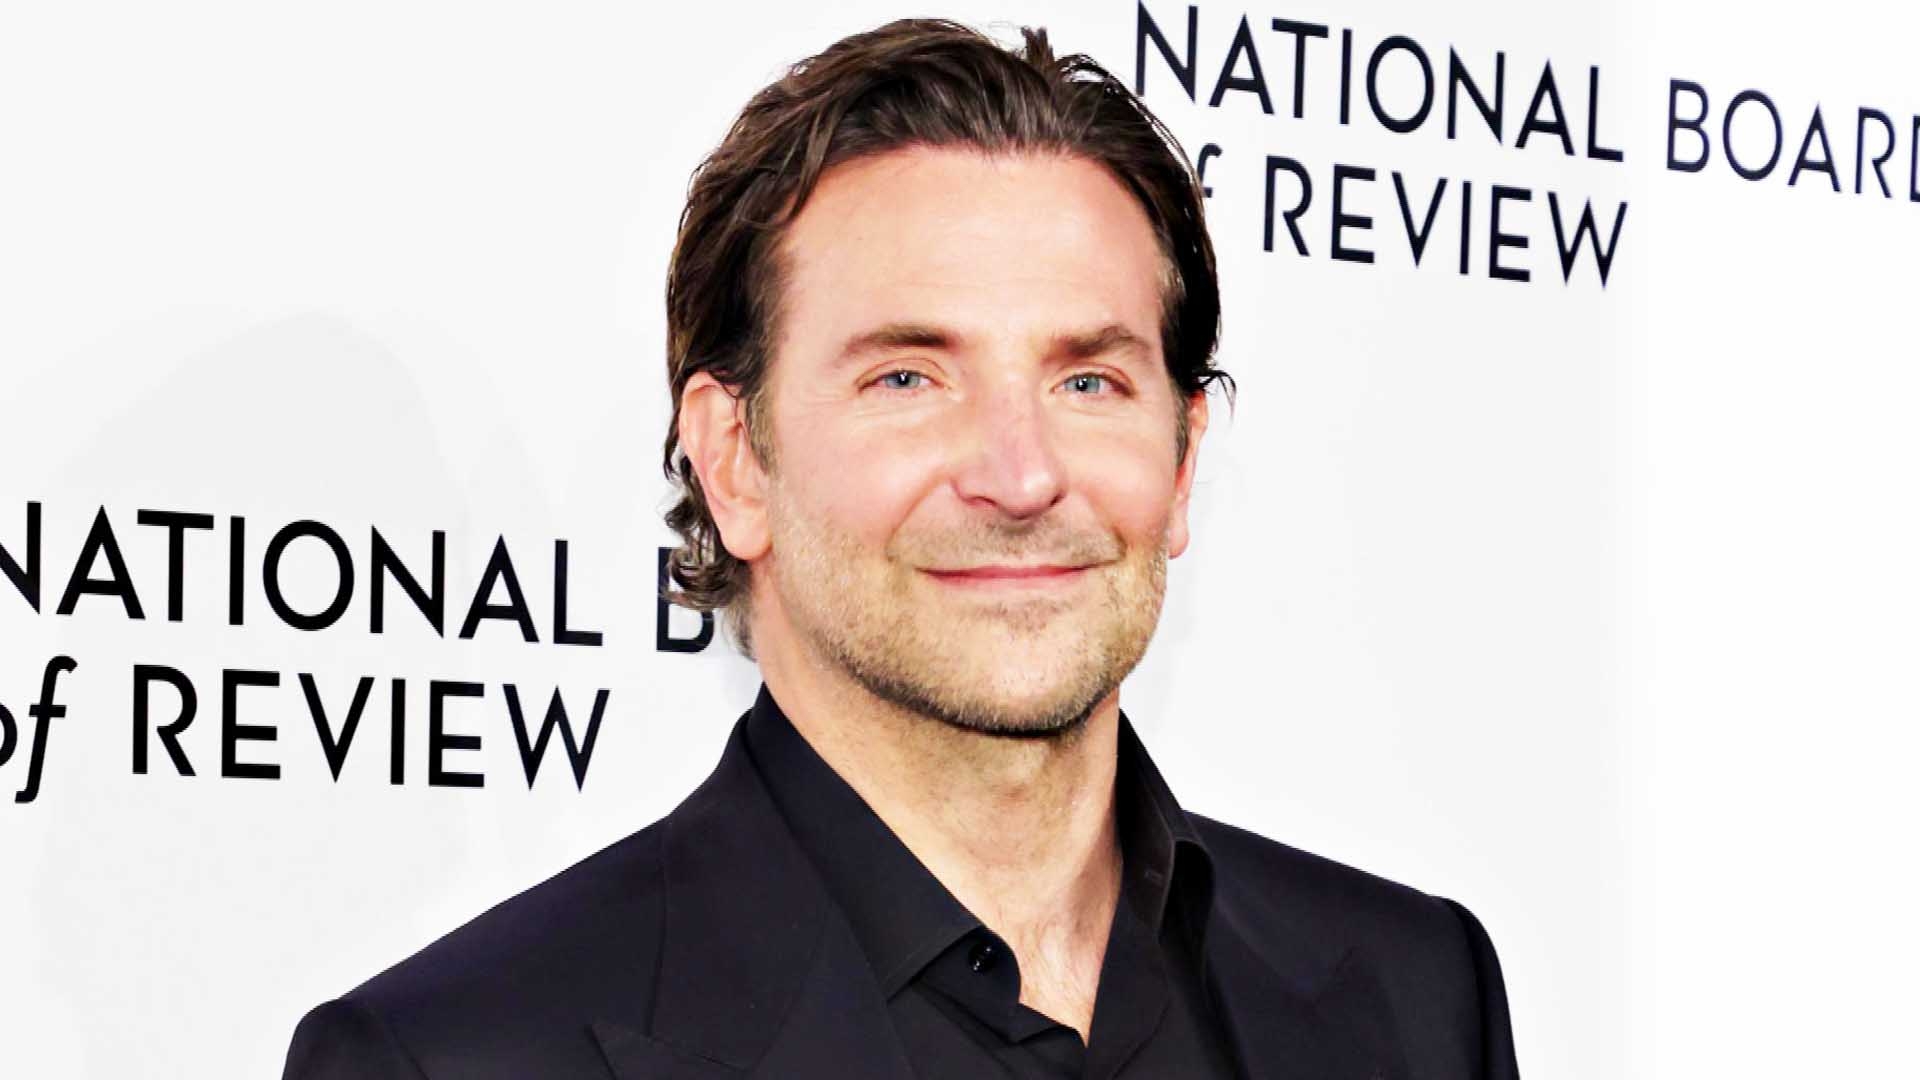 Bradley Cooper says he's 'lucky' to be sober after drug addiction nearly  killed him